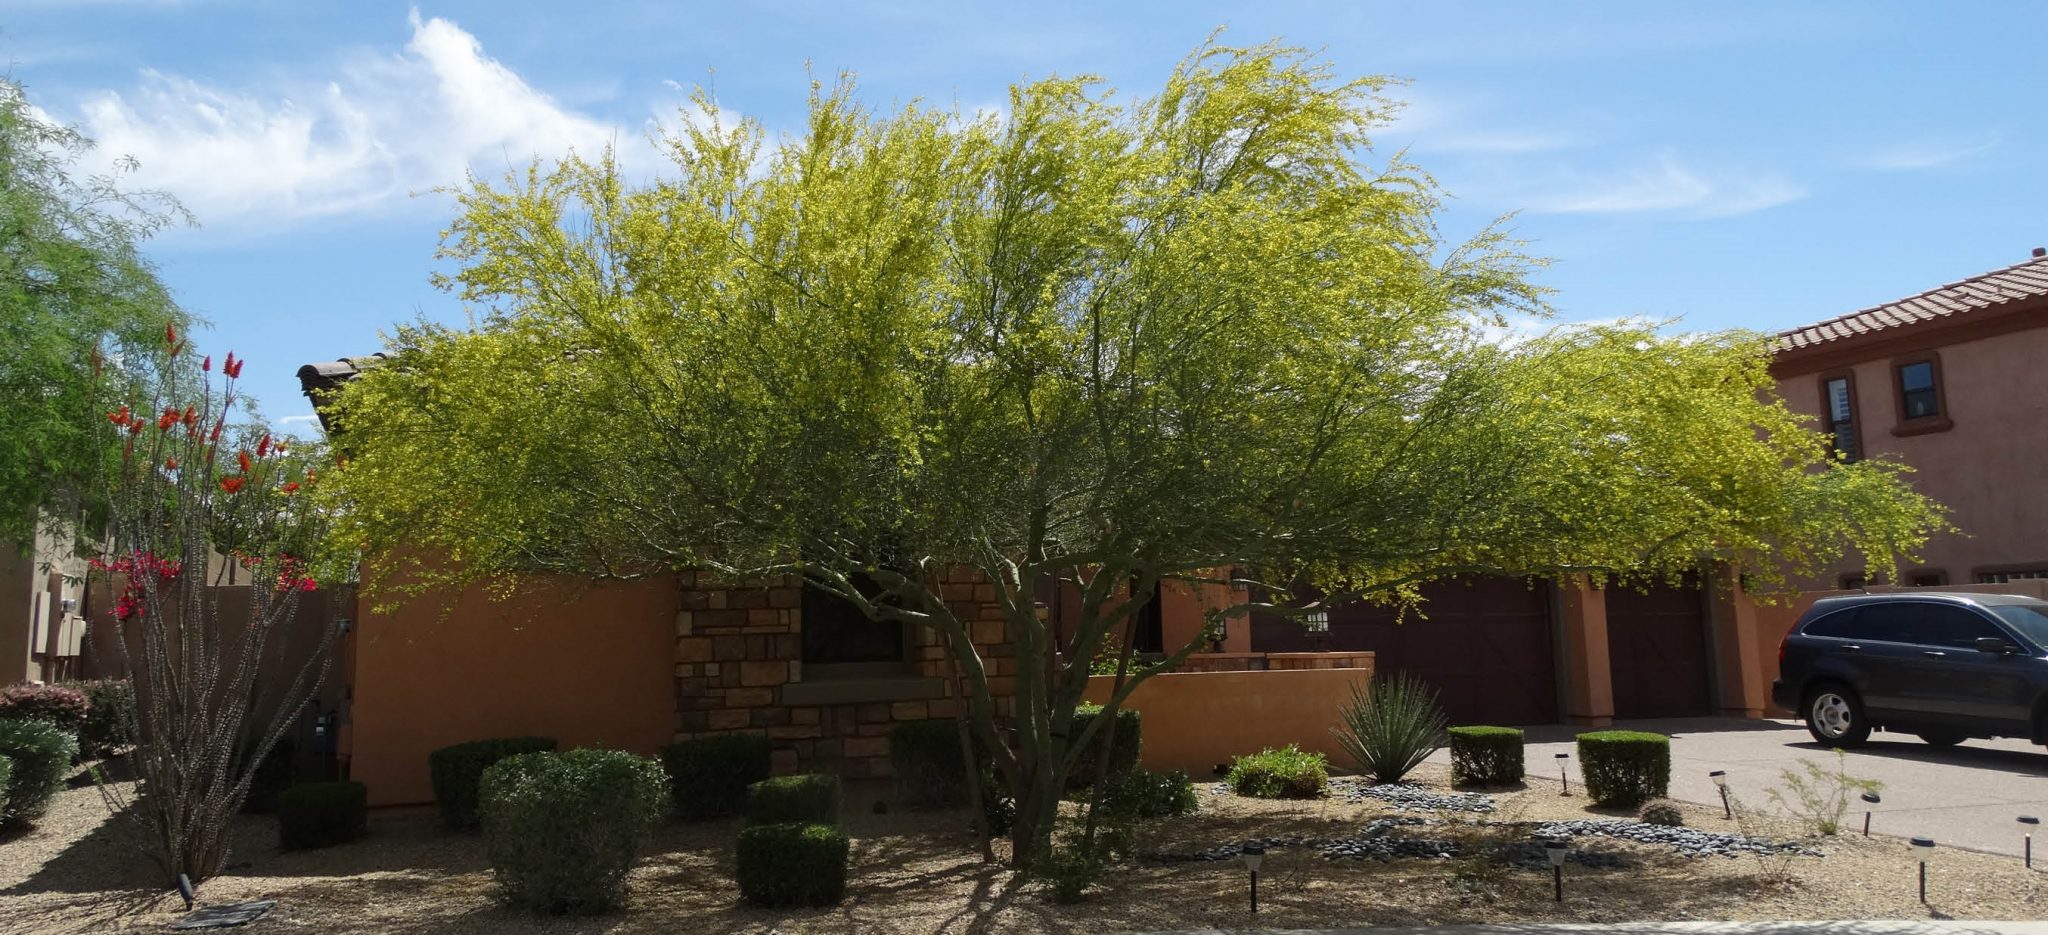 5 Best Shade Trees For Las Vegas